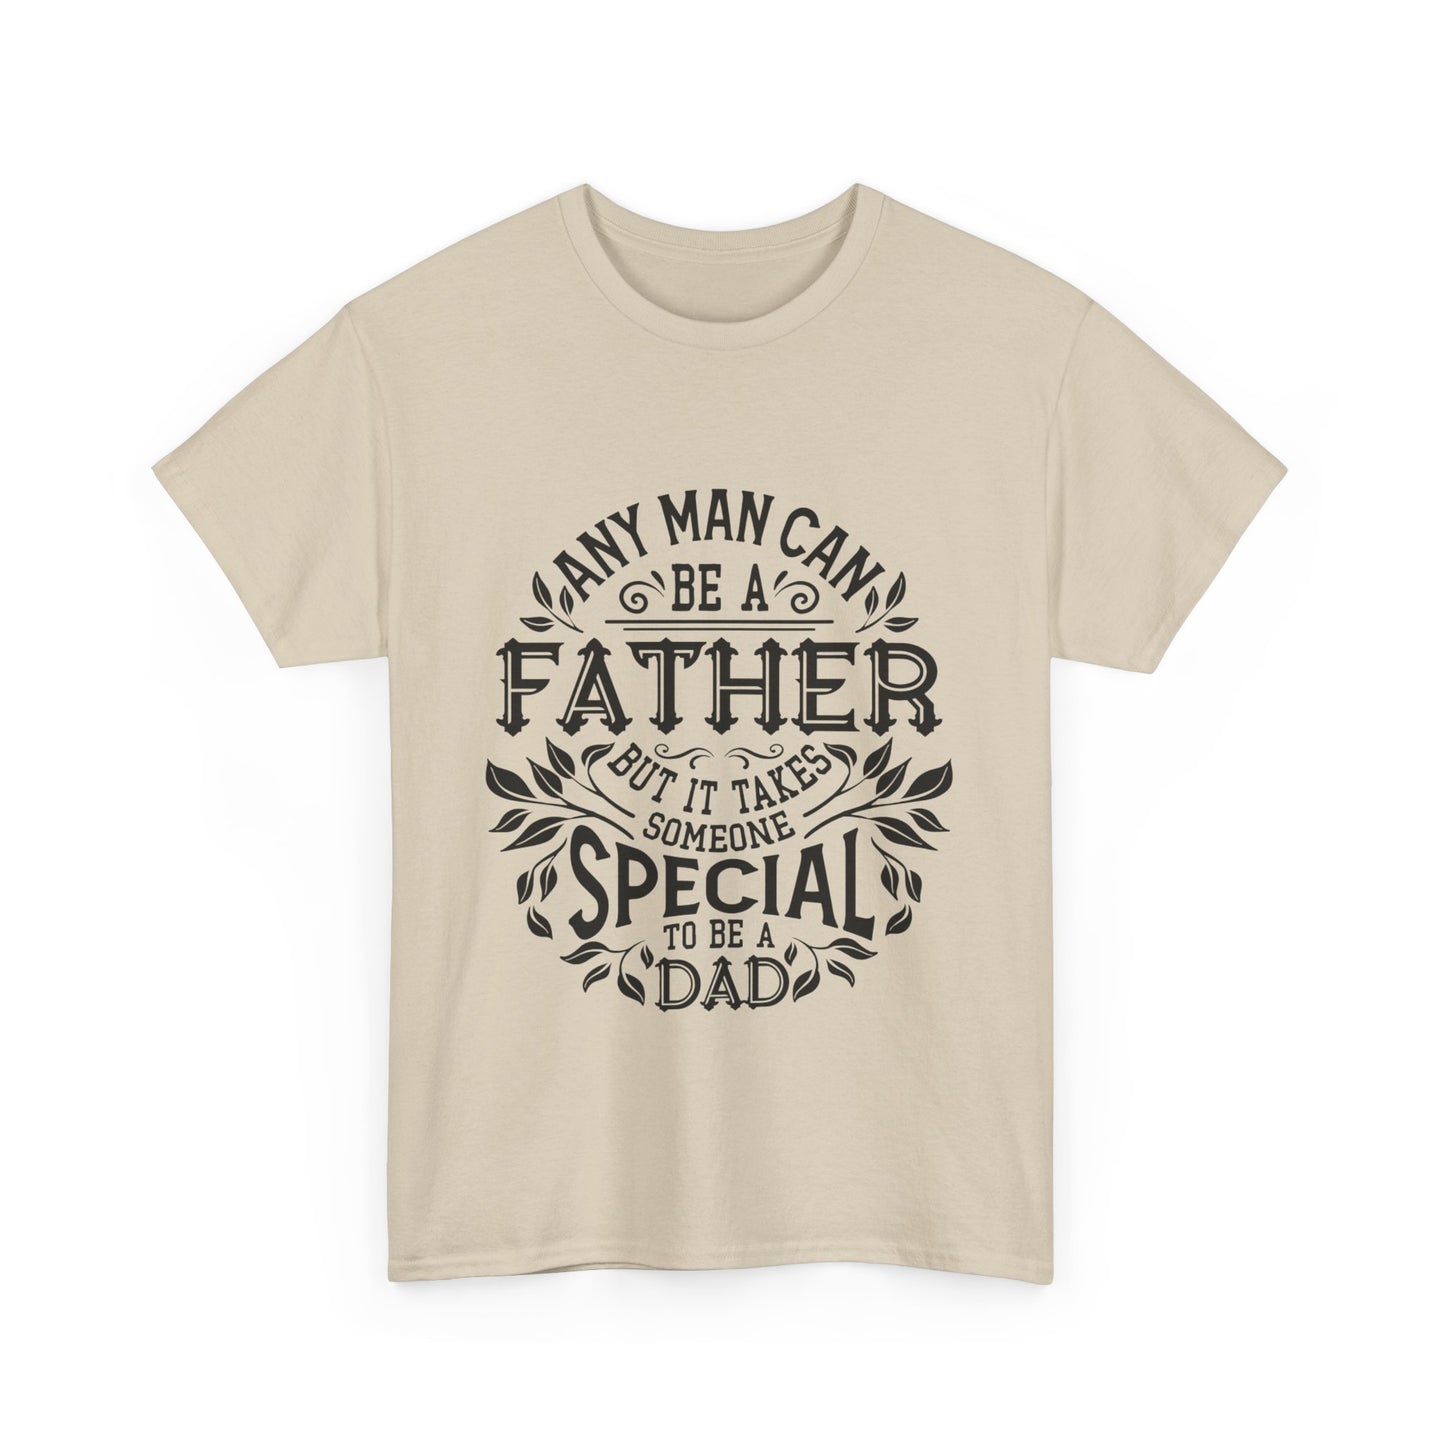 Dad Shirt - Father's Day Tee for Special Dads